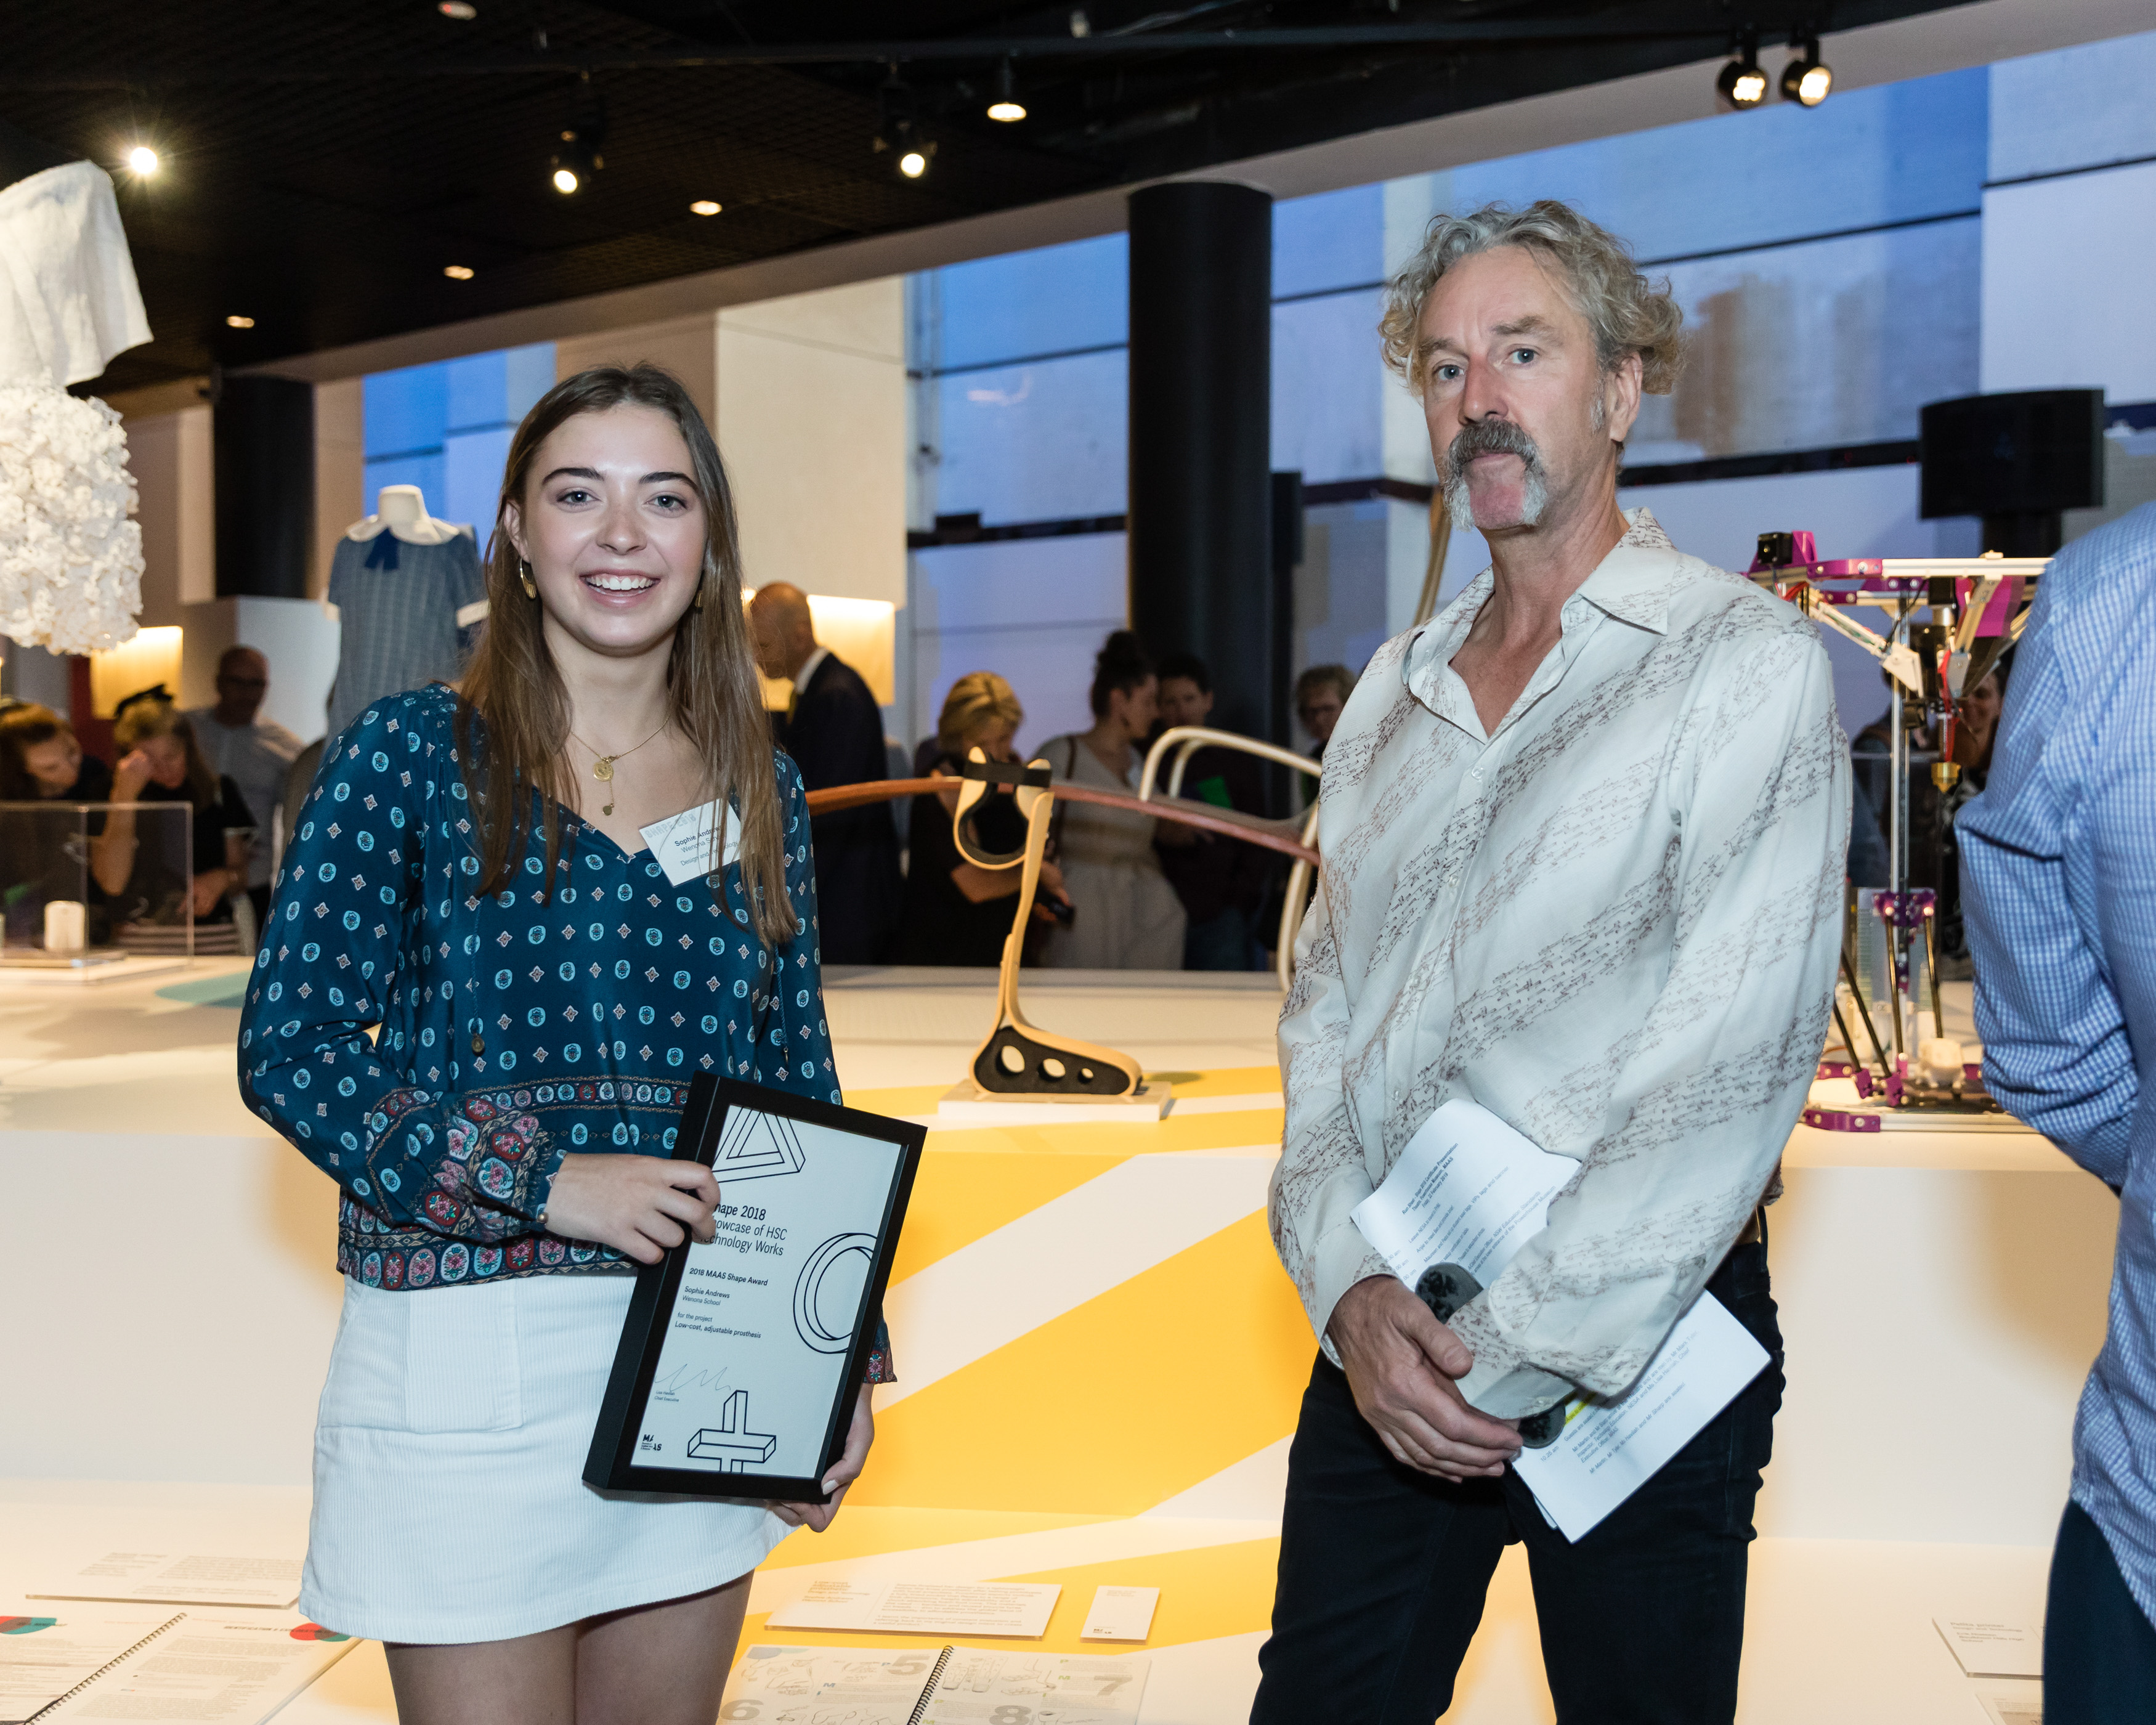 A young woman holding a certificate and a grey-haired man pose in front of an exhibition space.